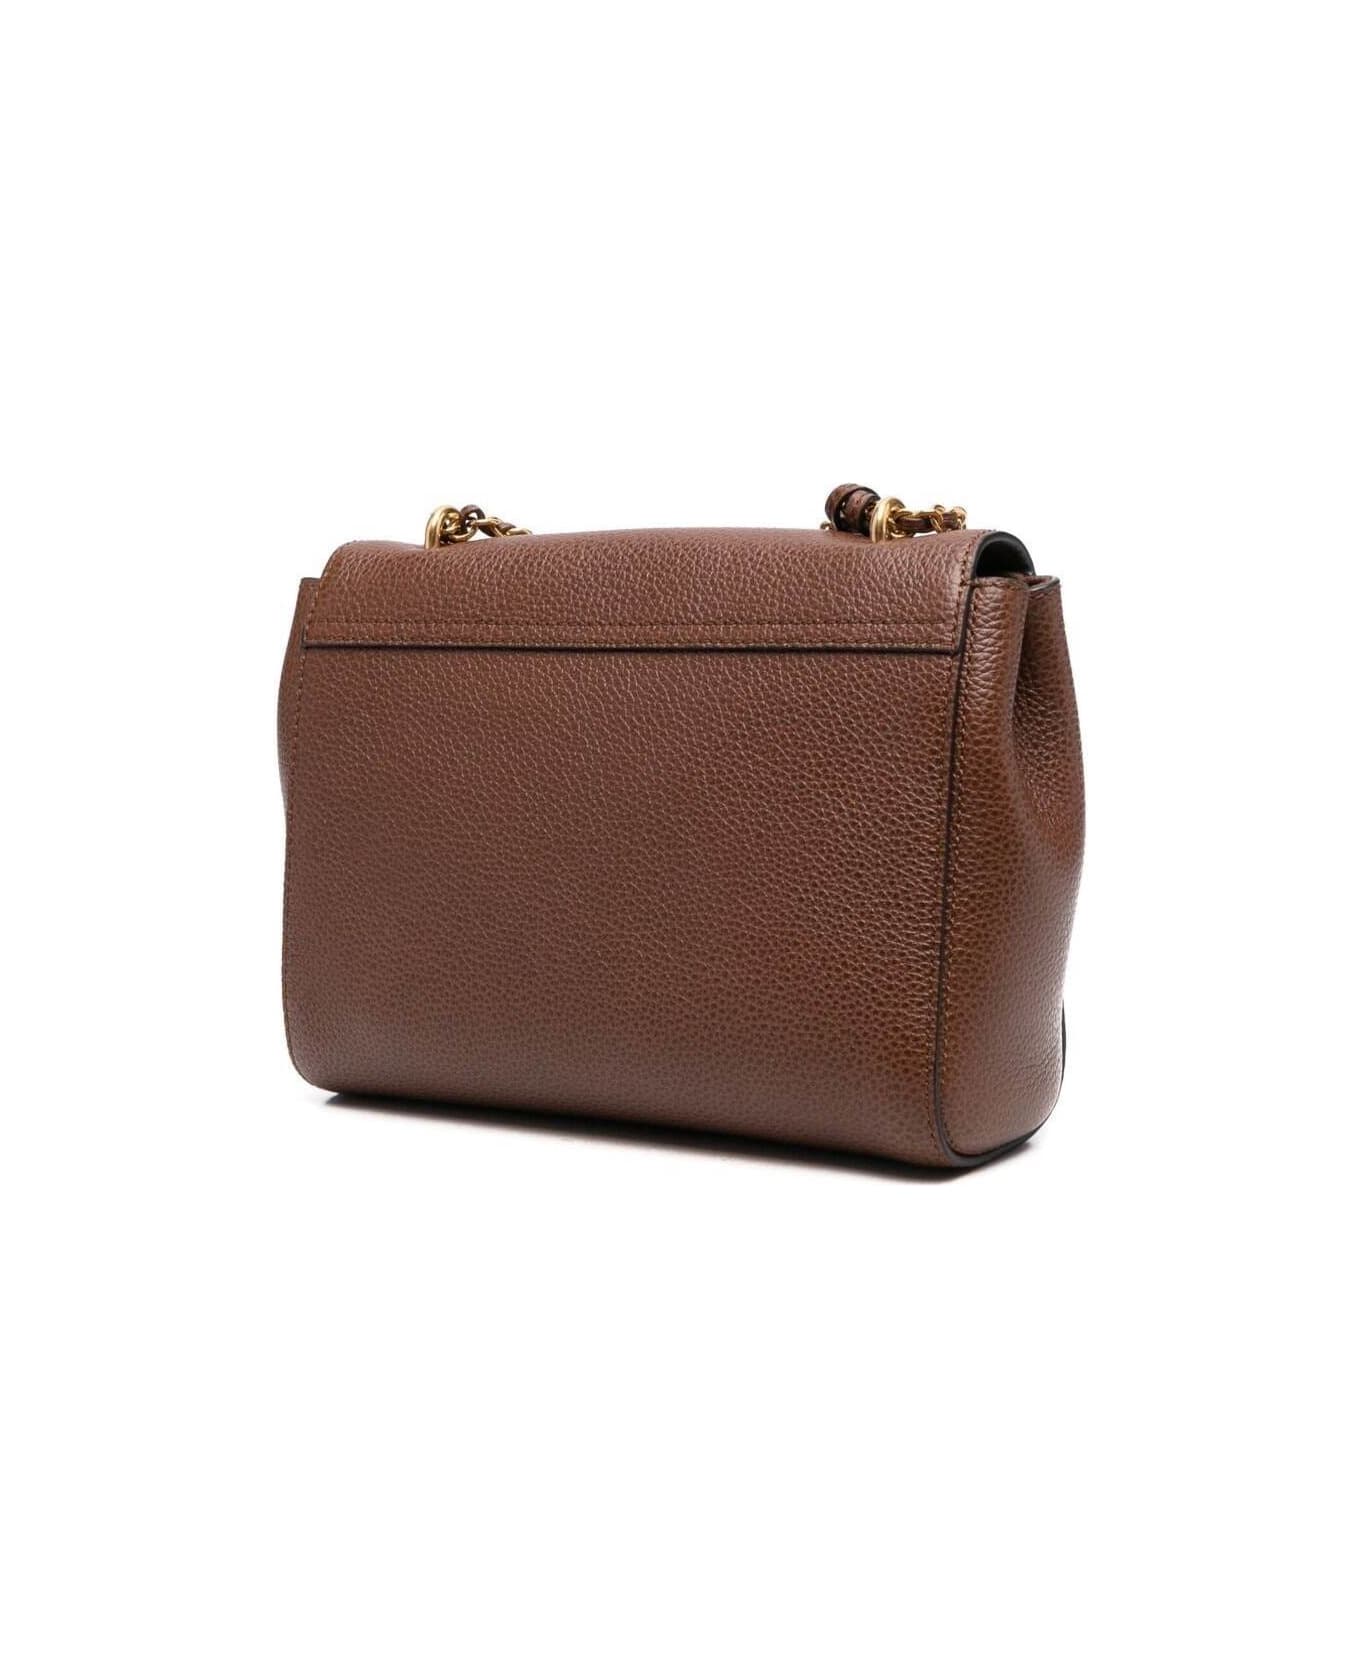 Mulberry Lily Crossbody Bag In Brown Leather Woman - Brown